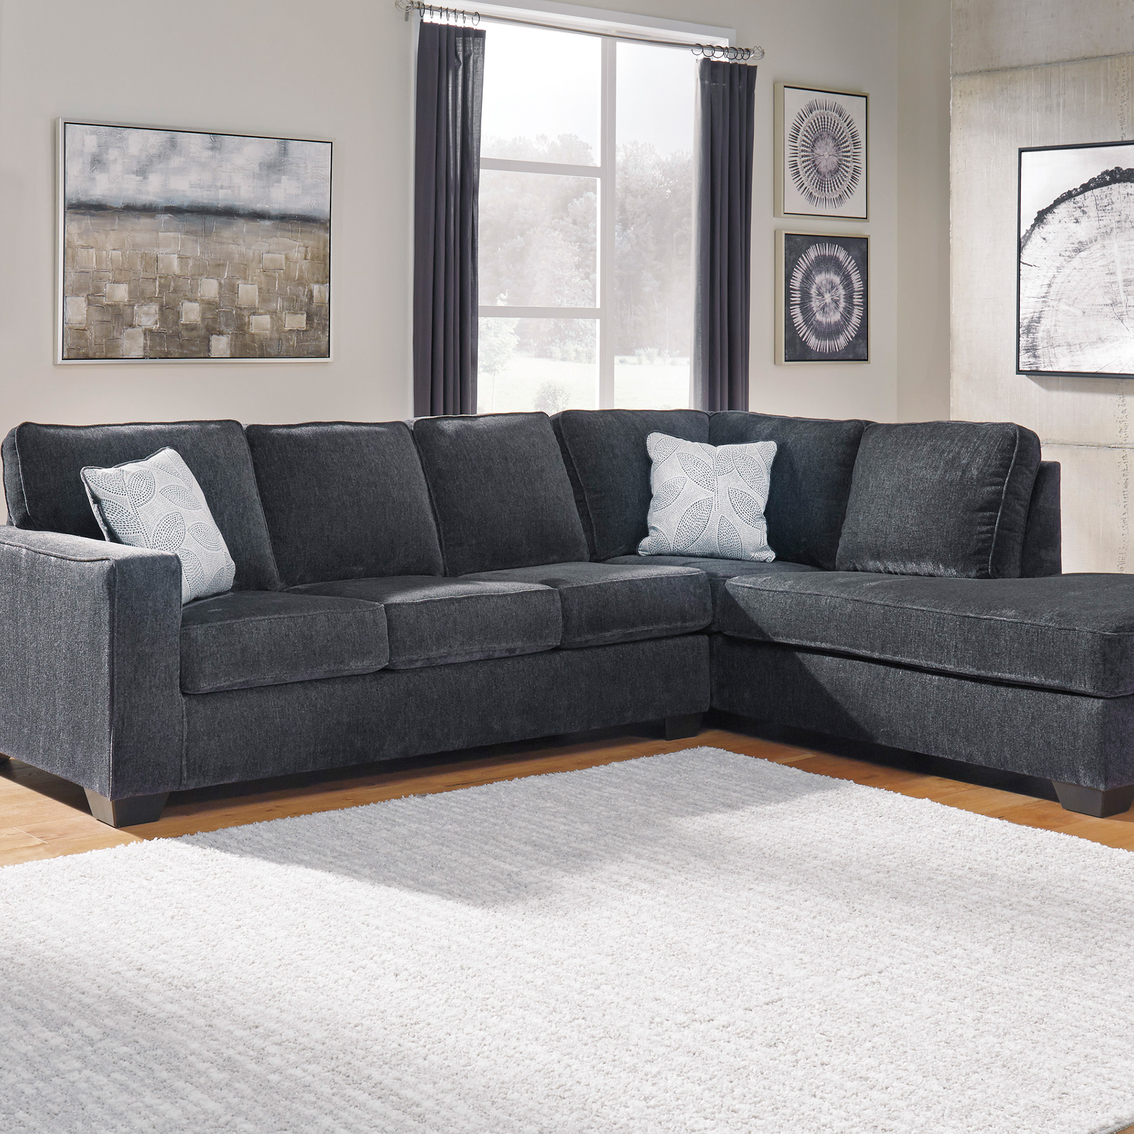 Signature Design by Ashley Altari 2 pc. Sectional, RAF Corner Chaise / LAF Sofa - Image 4 of 4